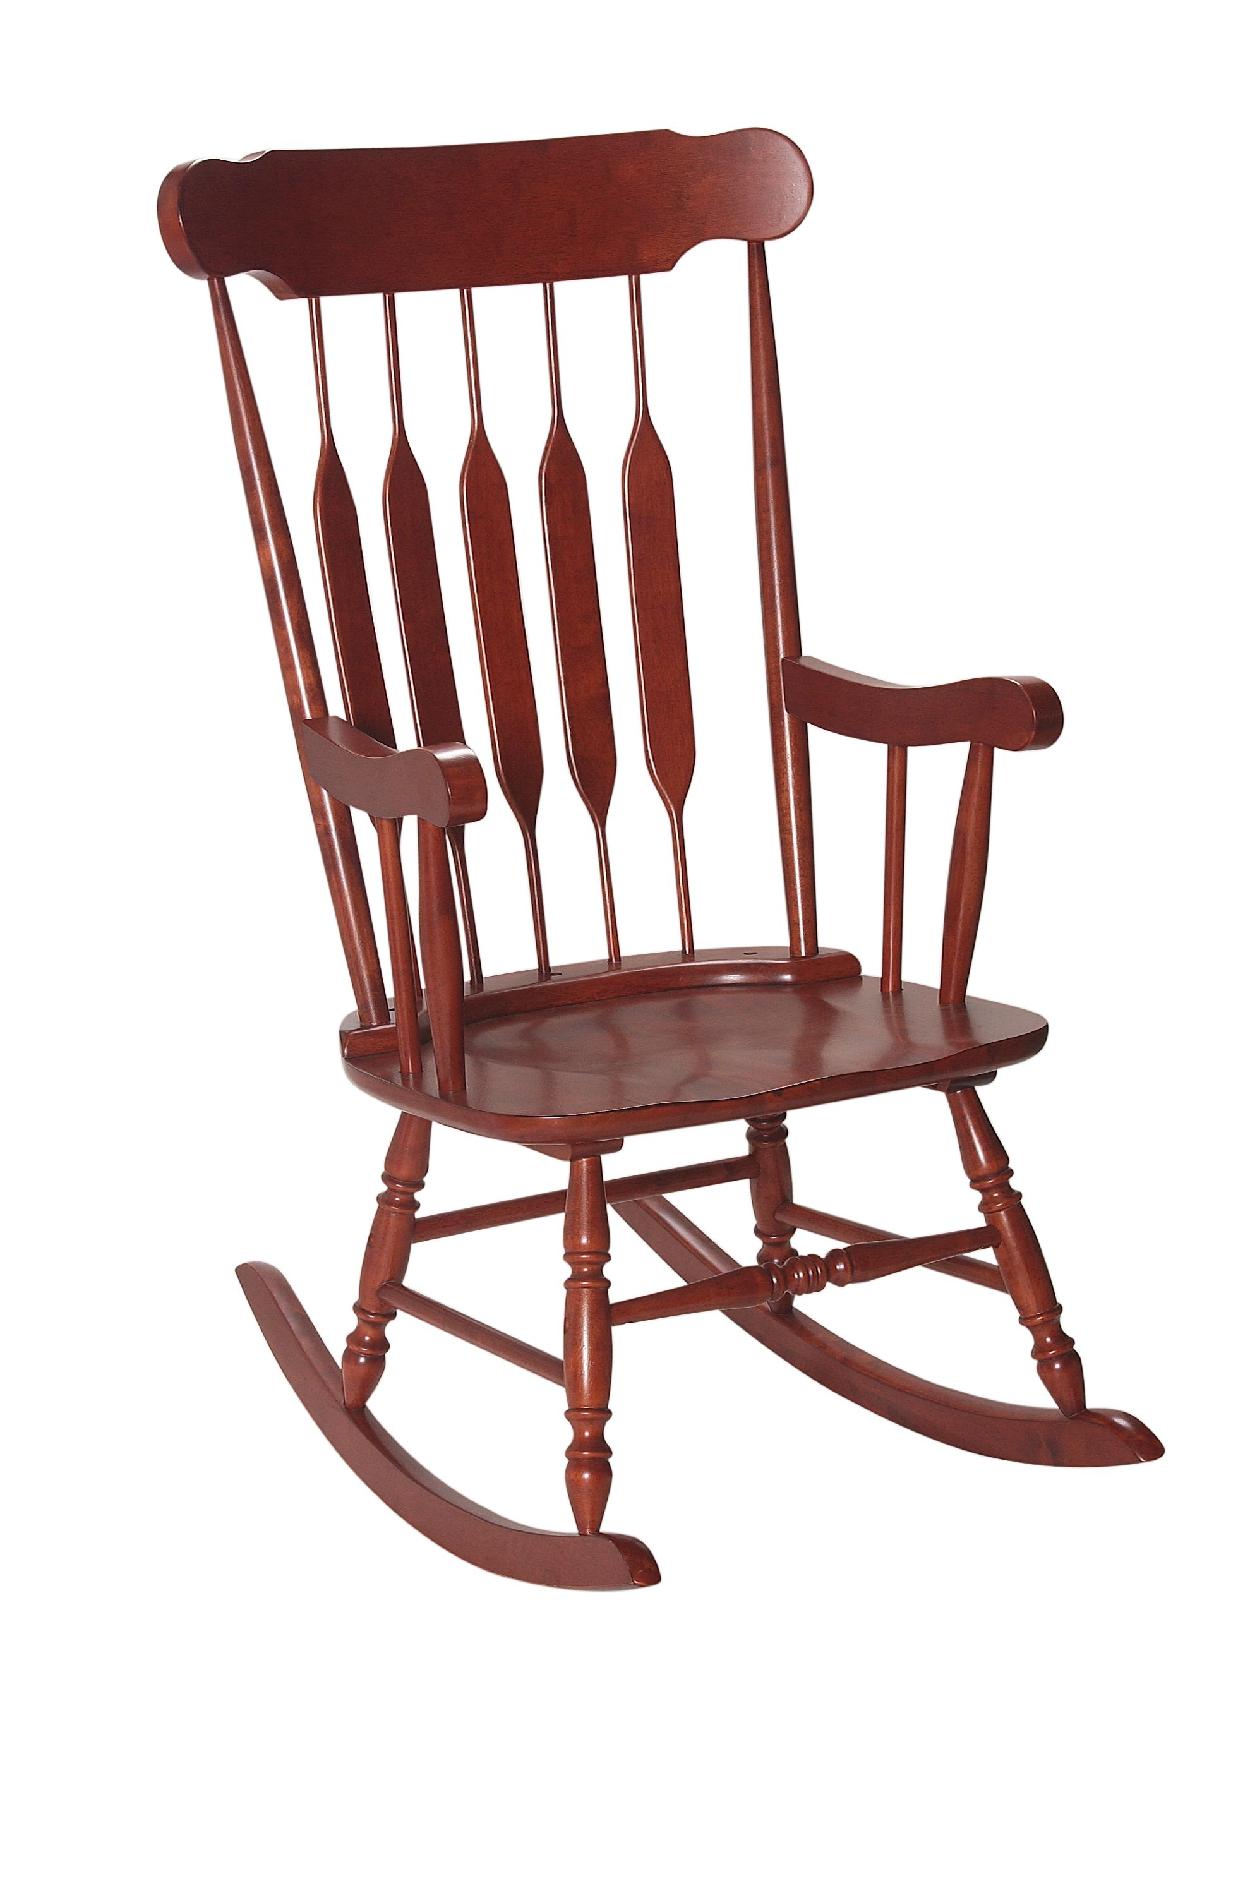 Gift Mark 3800C Adult Rocking Chair with Cherry Finish